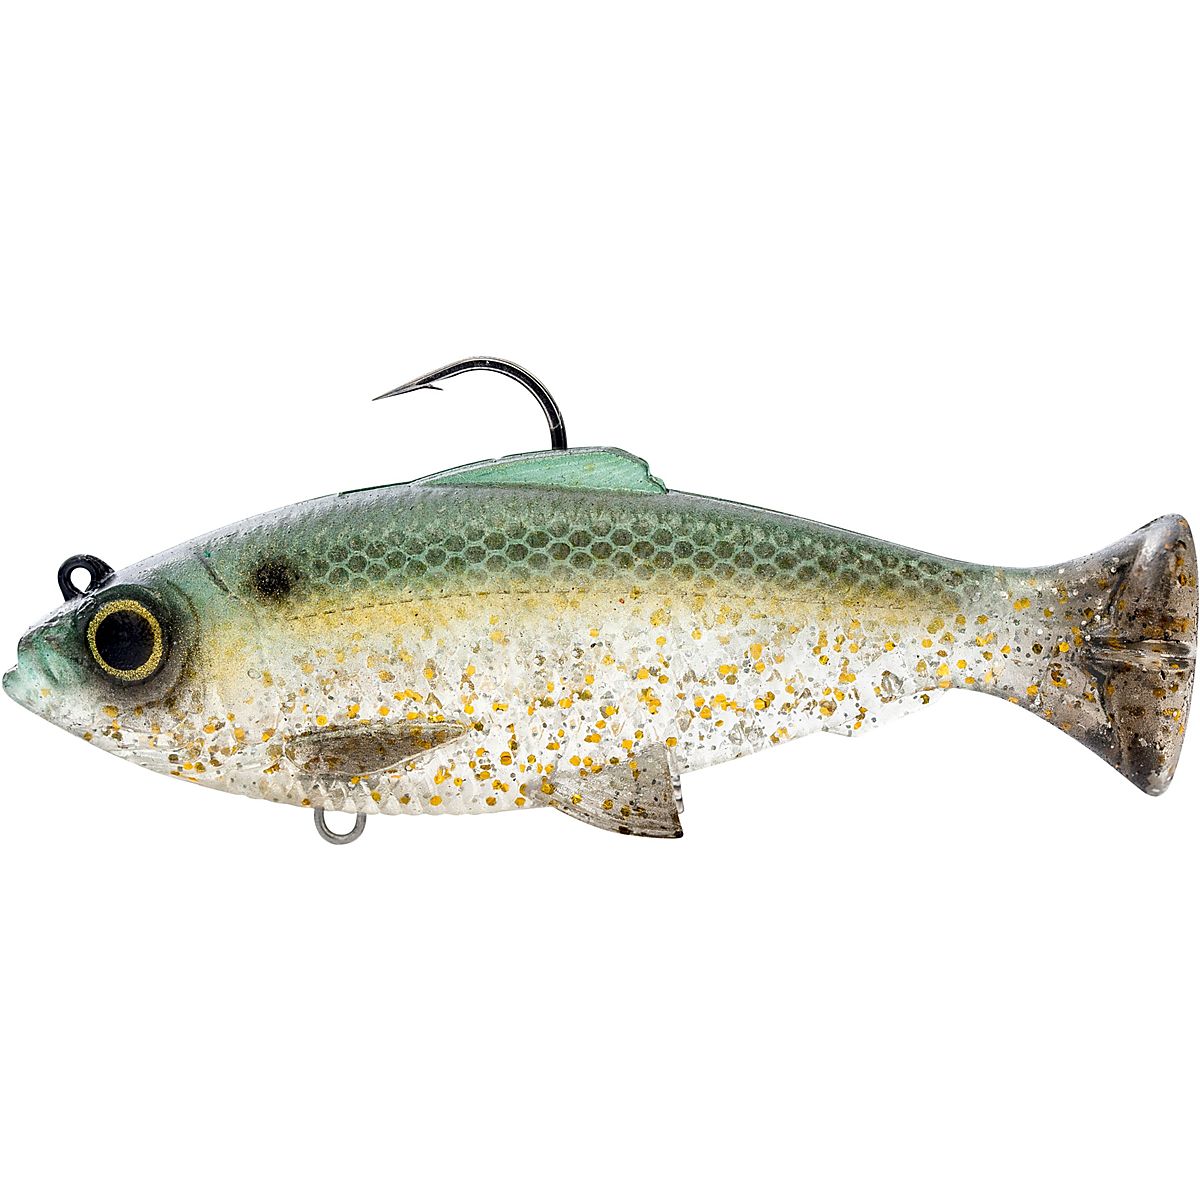 Academy Sports + Outdoors D.O.A. Fishing Lures 3 Standard Shrimp